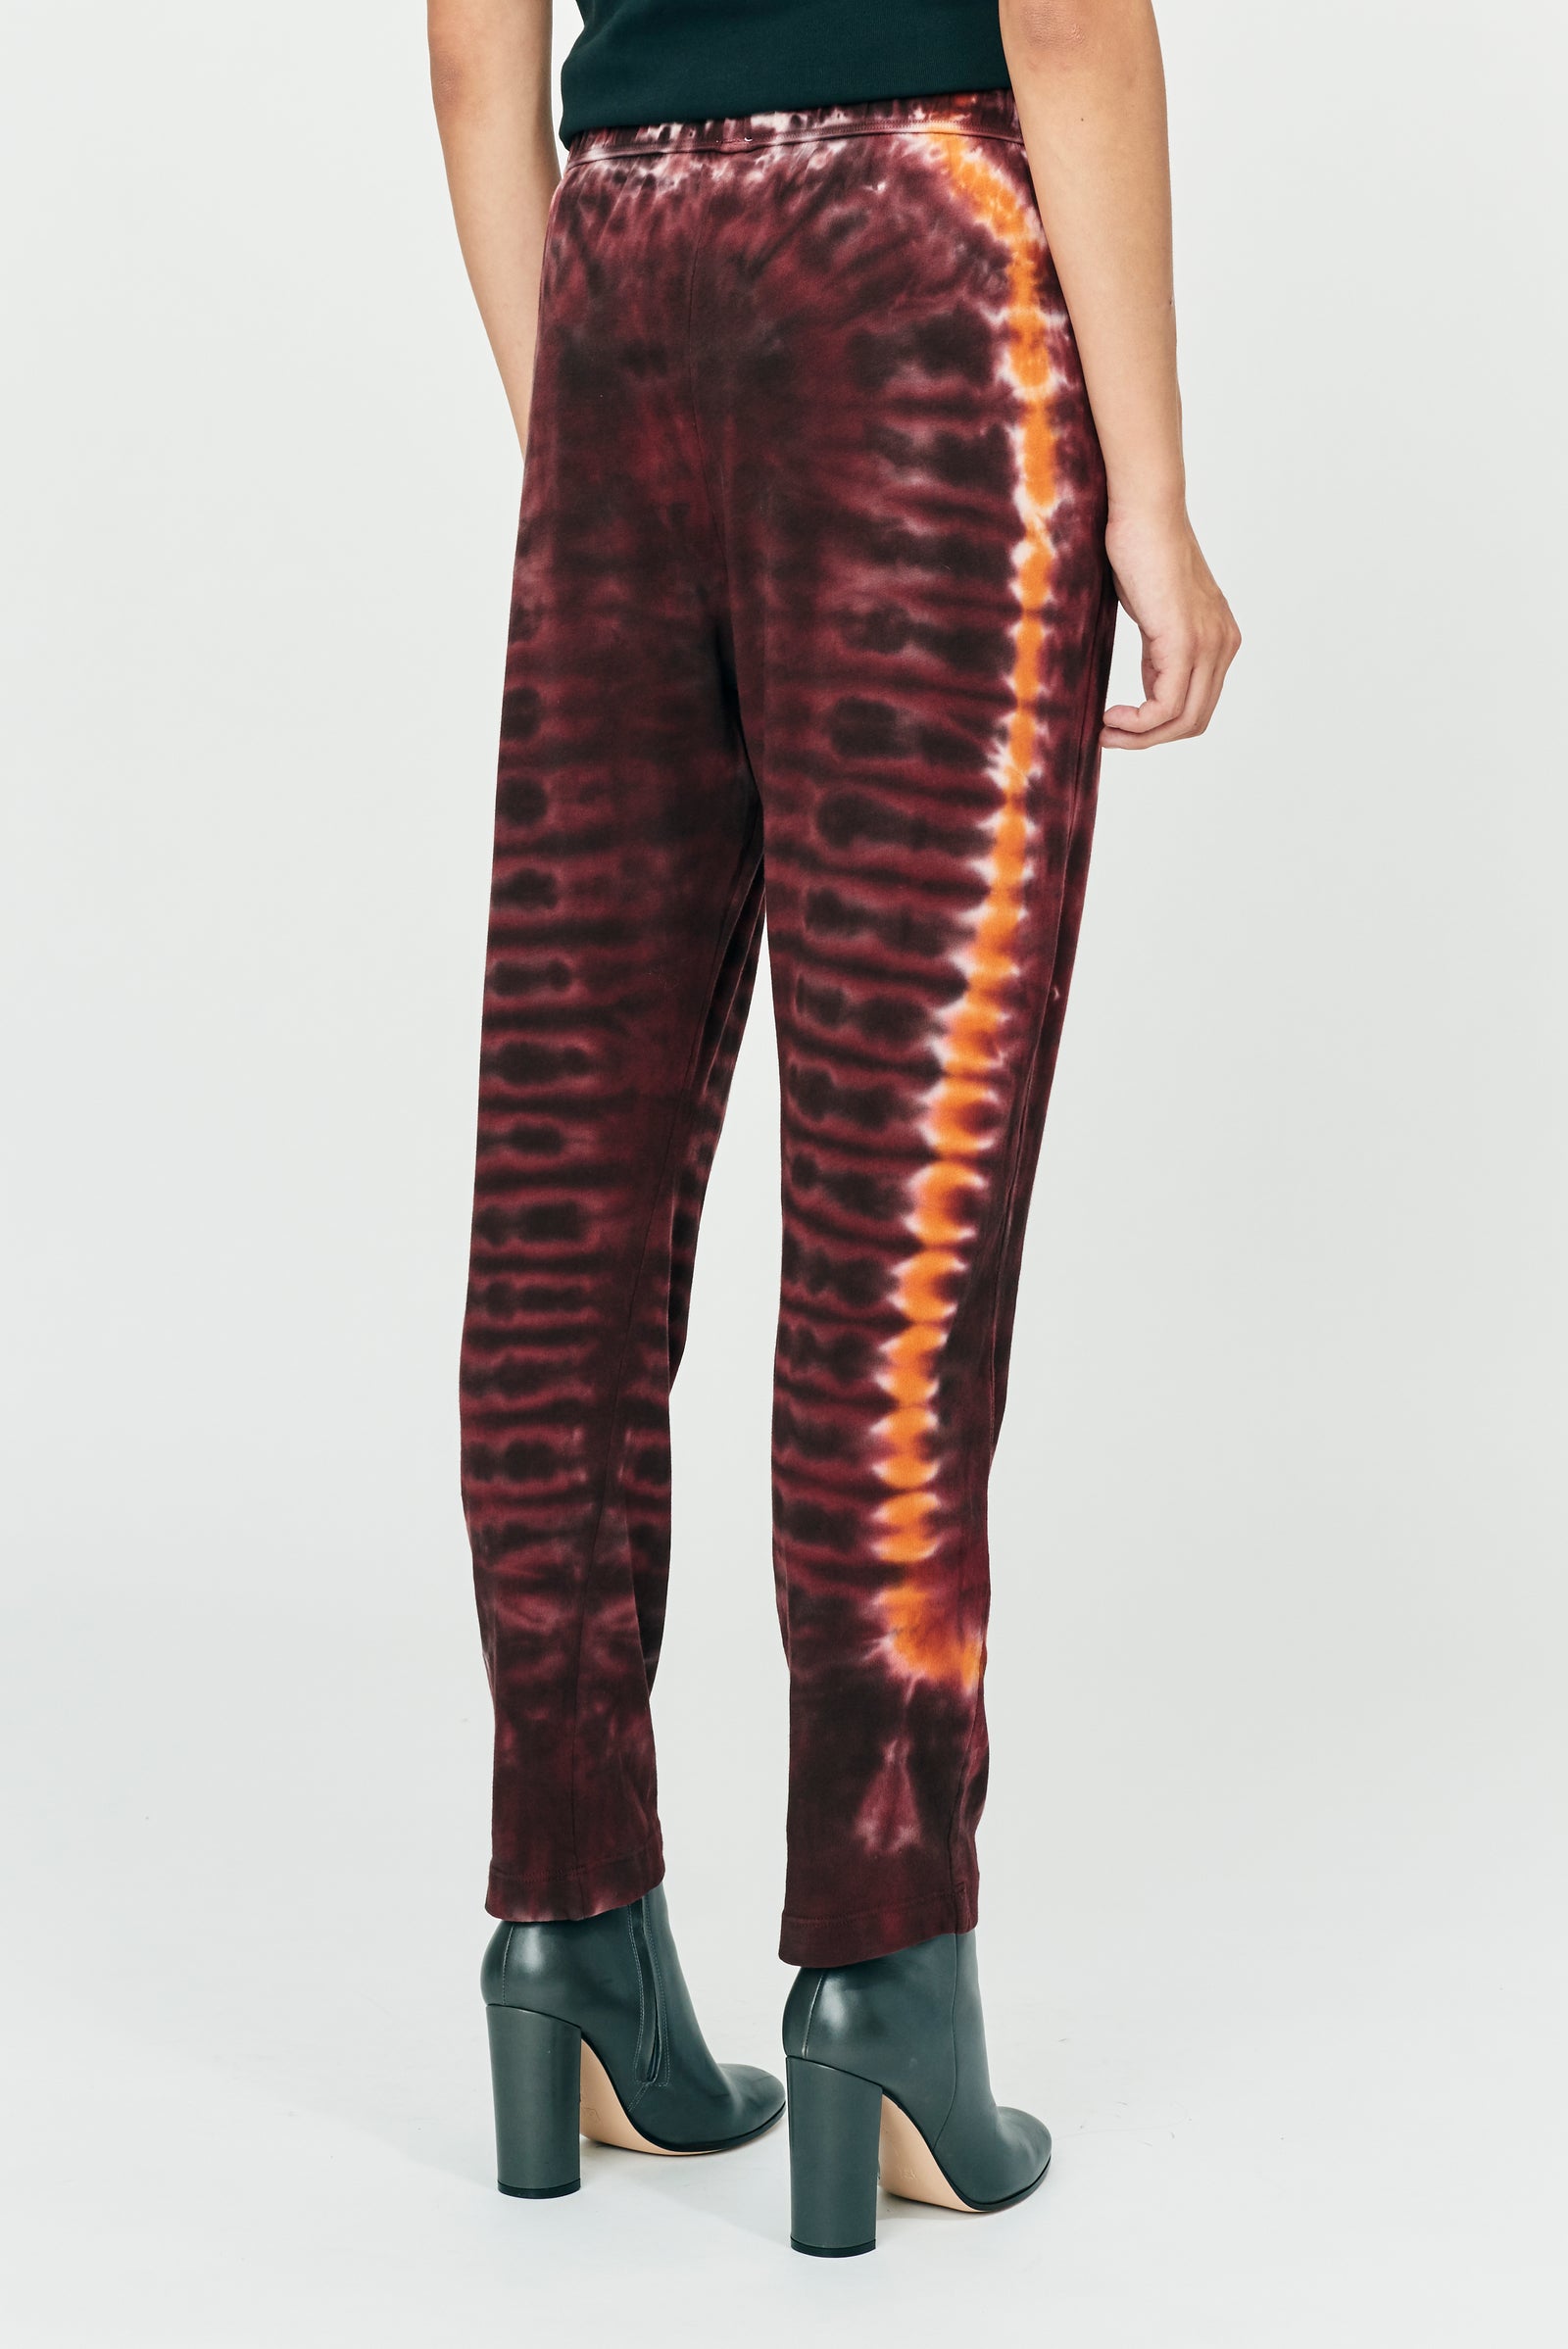 Red Hills Tie Dye Classic Jersey Easy Pant Back Close-Up View